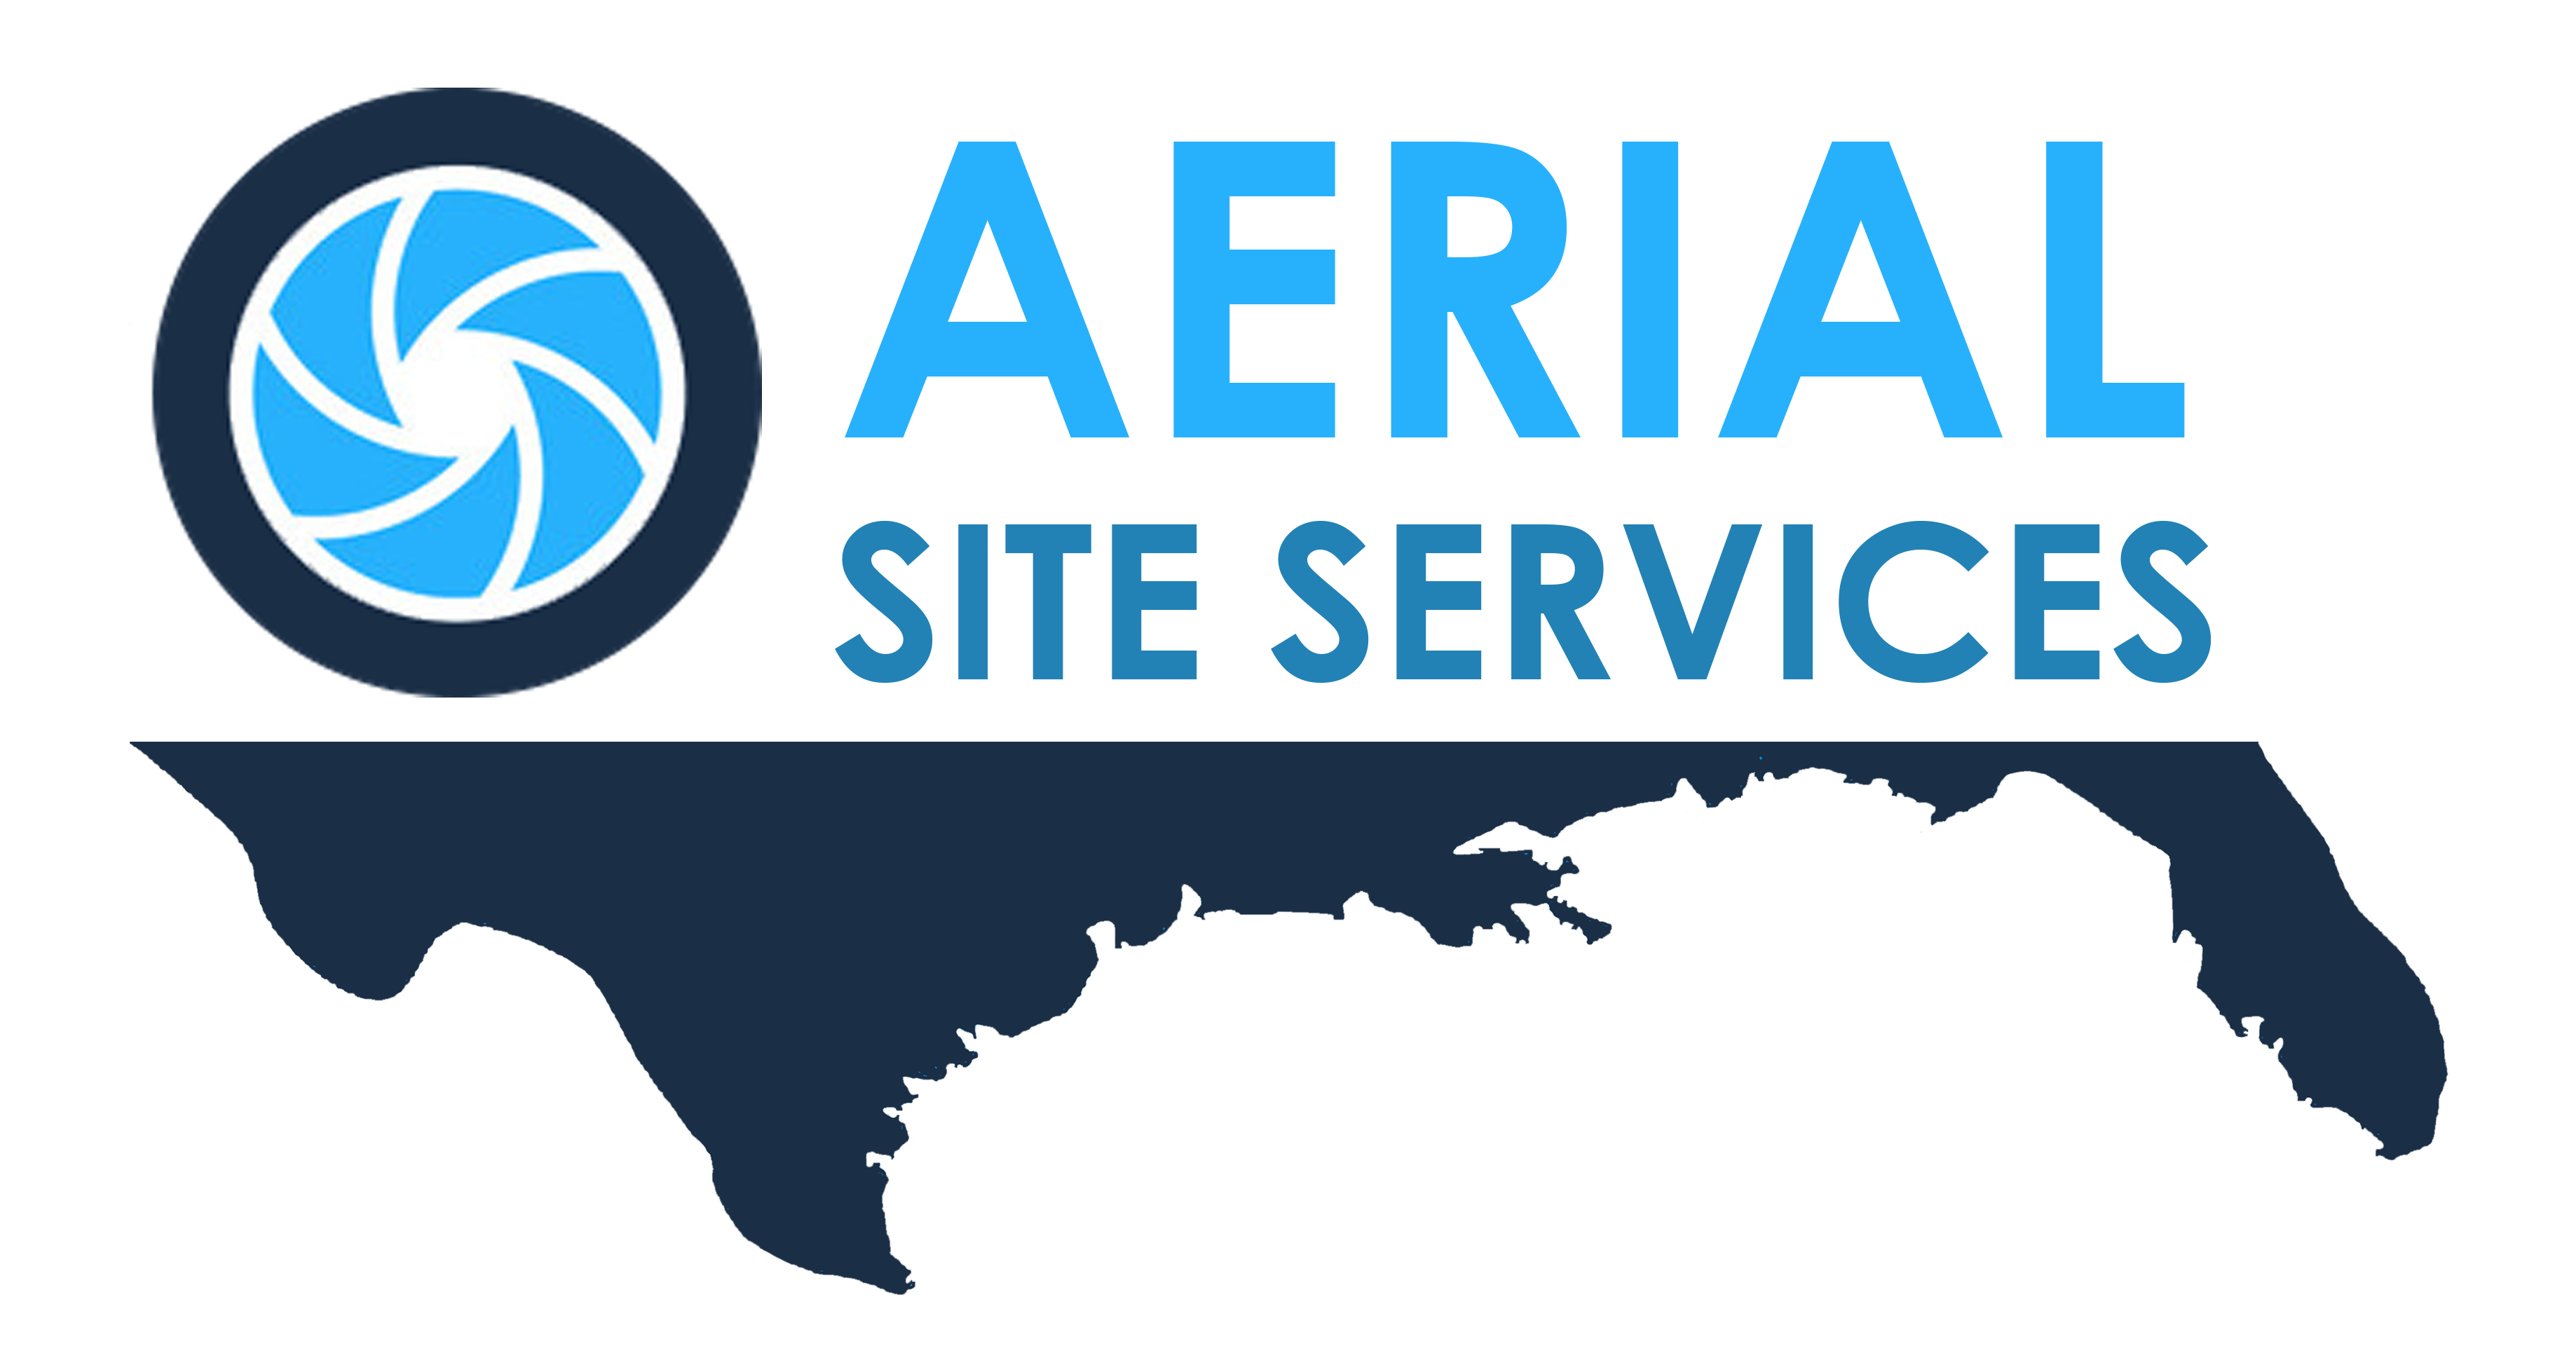 AERIAL Site Services